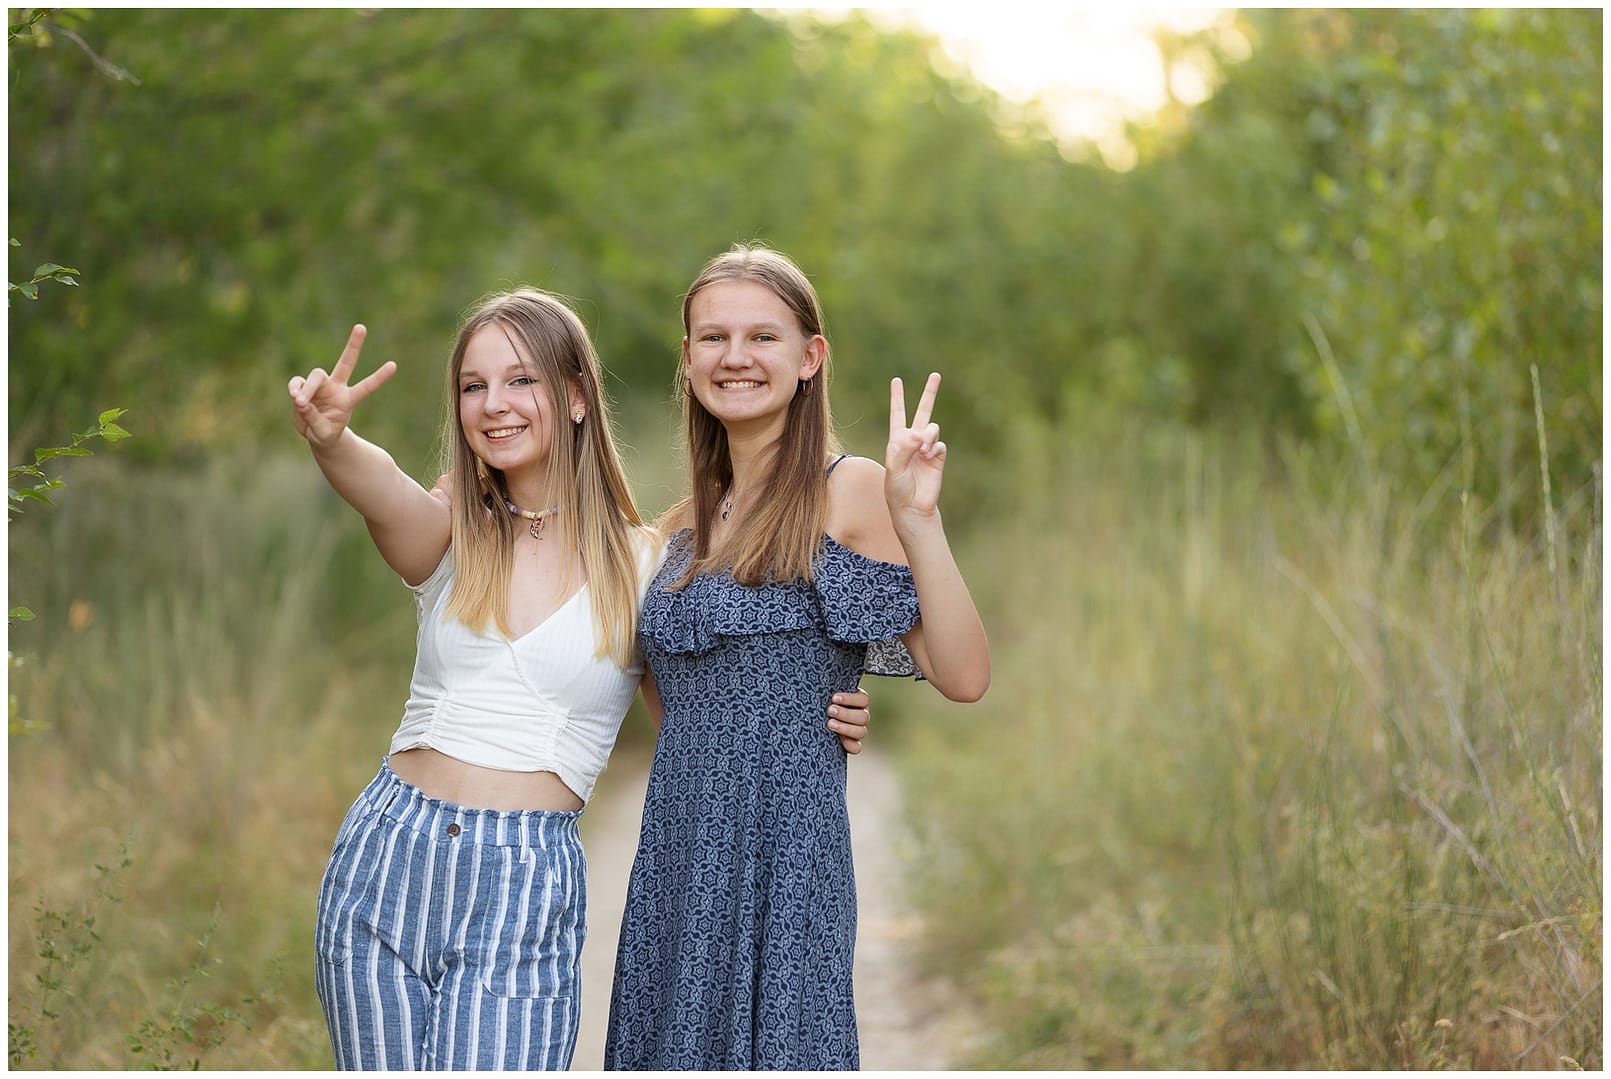 Sisters give peace sign during family session. Photo by Tiffany Hix Photography.